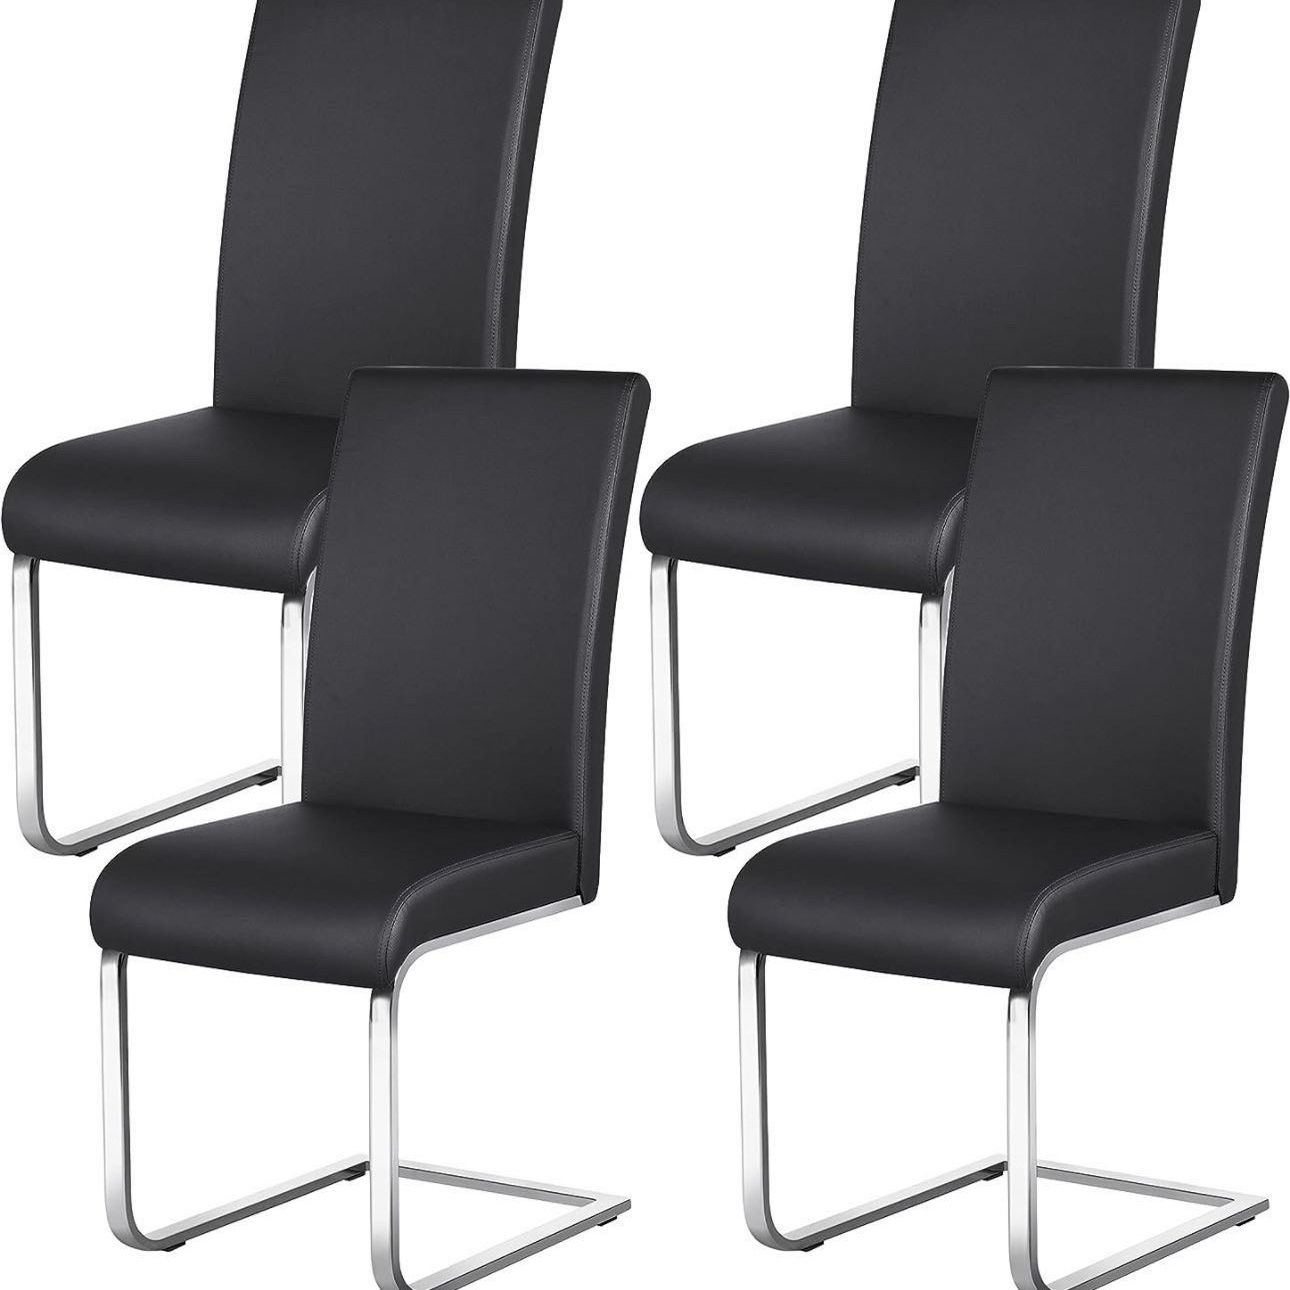 4pcs Dining Chairs Armless Leather Dining/Desk Room Kitchen Chairs with Upholstered Seat, Metal Legs and High Back for Kitchen, Living Room, Leisure, 